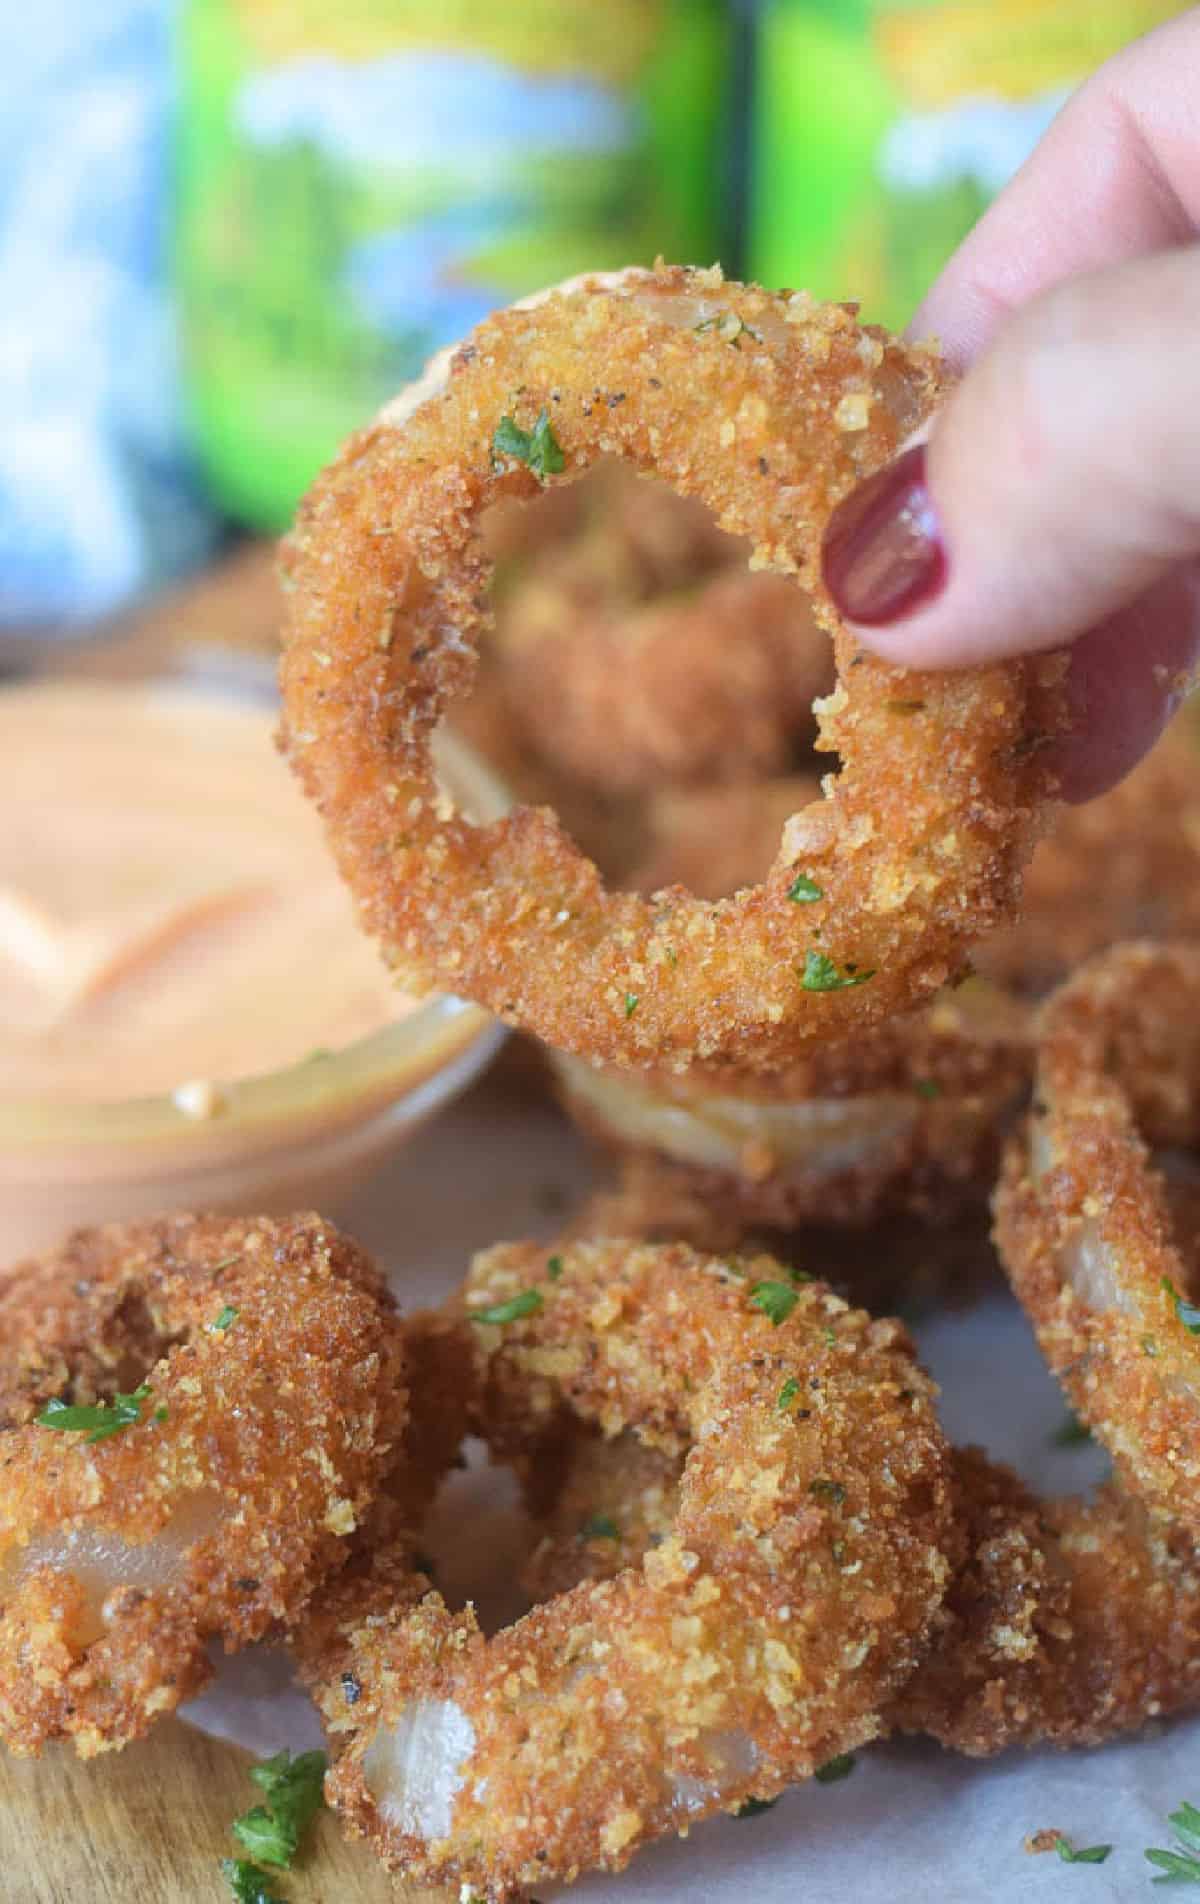 A parmesan onion ring being picked up and ready to eat.